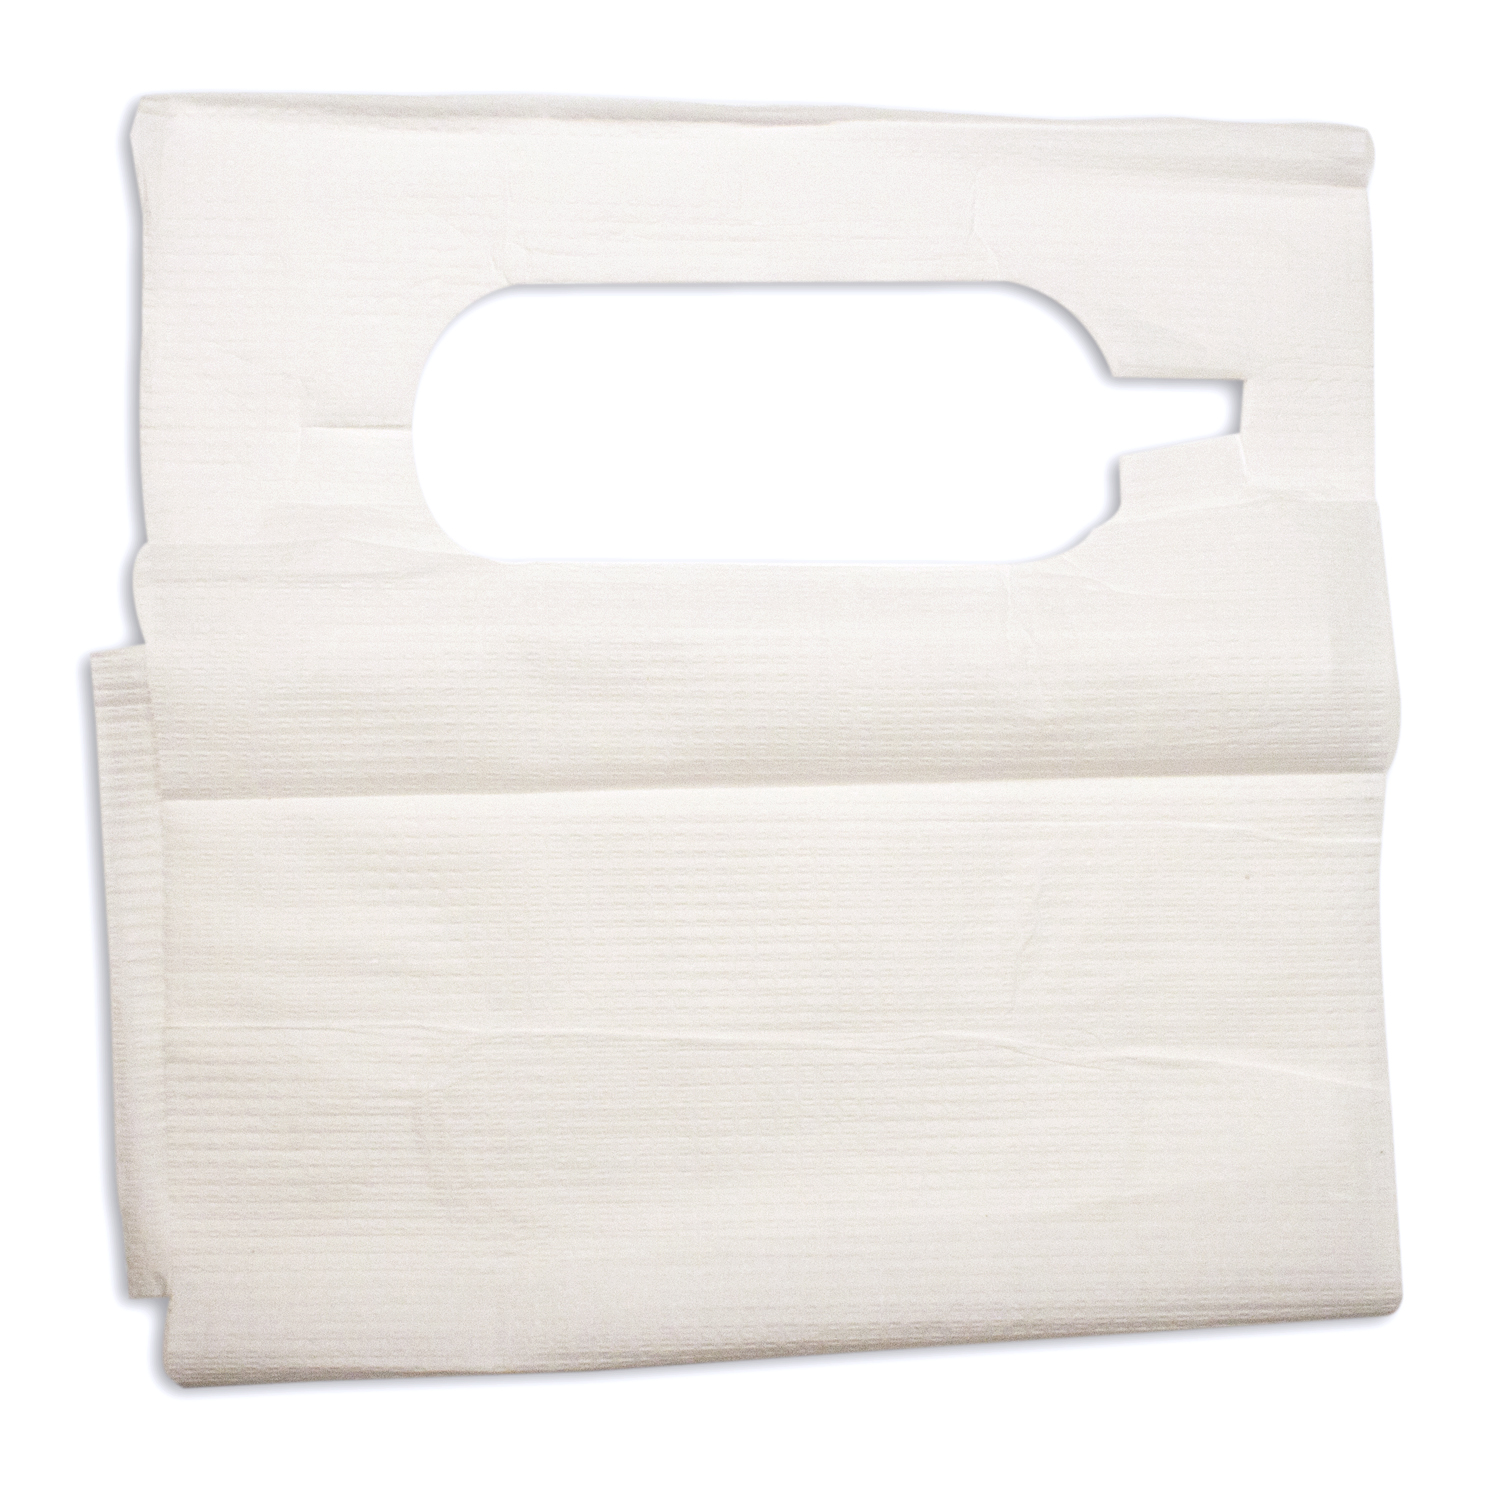 Disposable Adult Lap Bibs - Slipover 16 x 33in